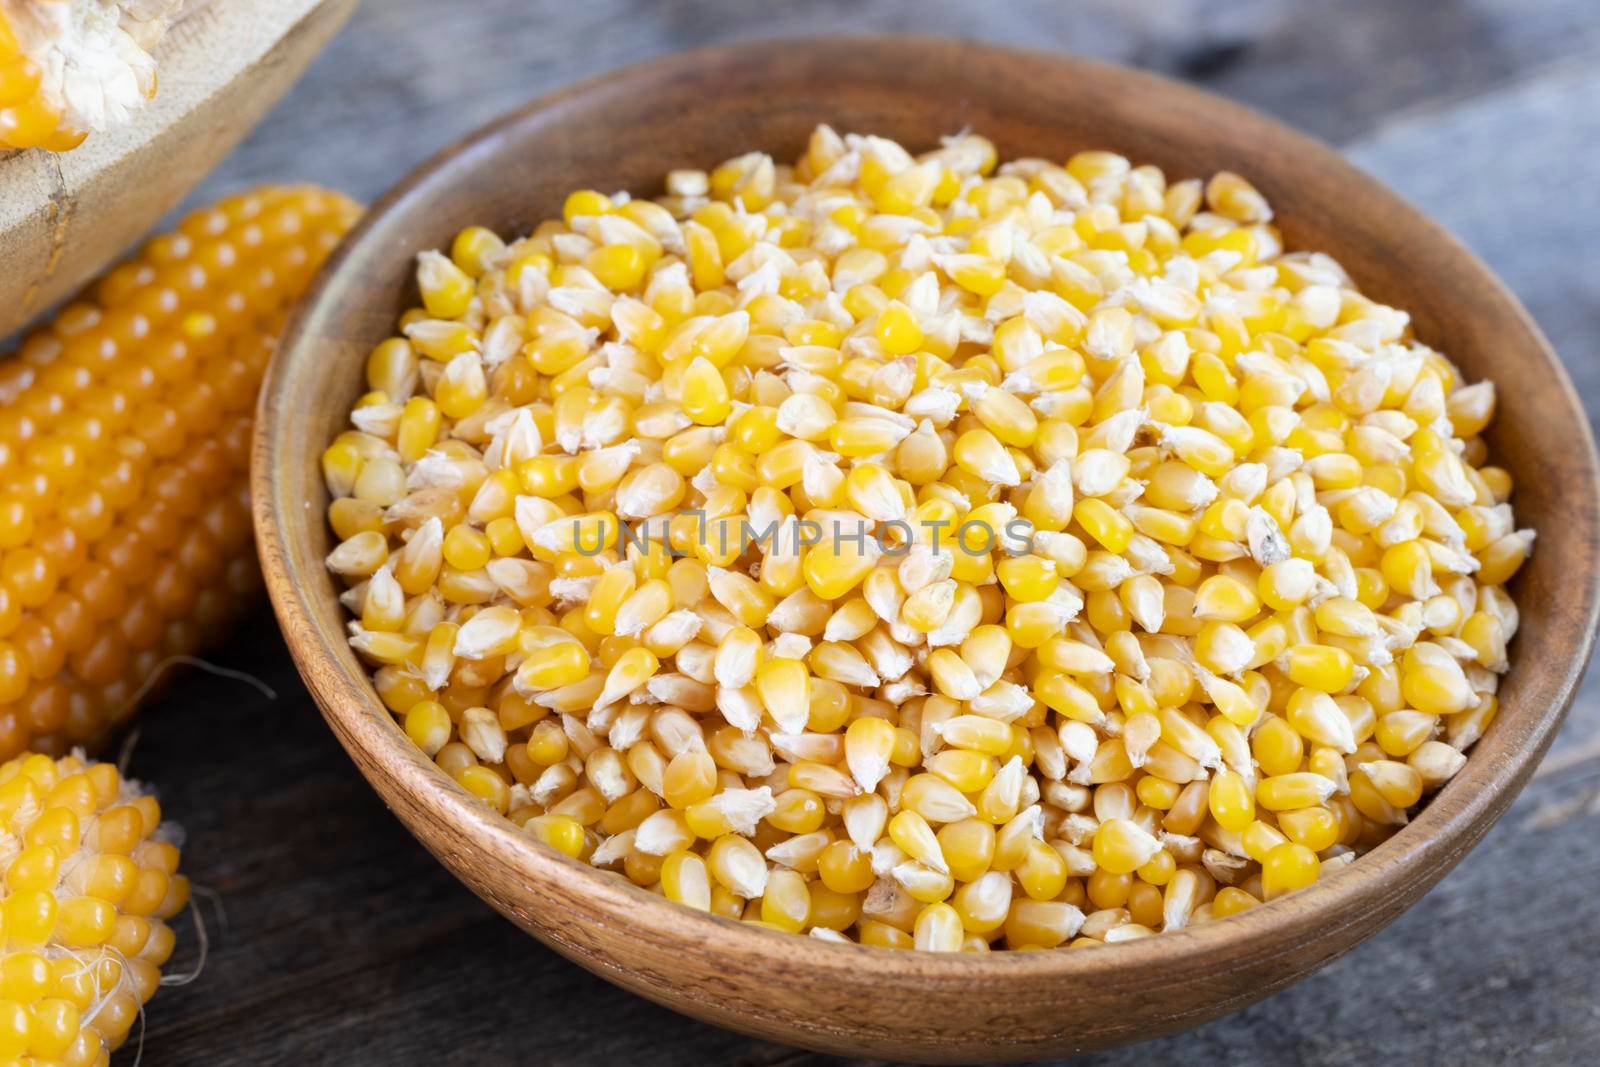 Popcorn kernels in a wooden bowl with popcorn on the cob